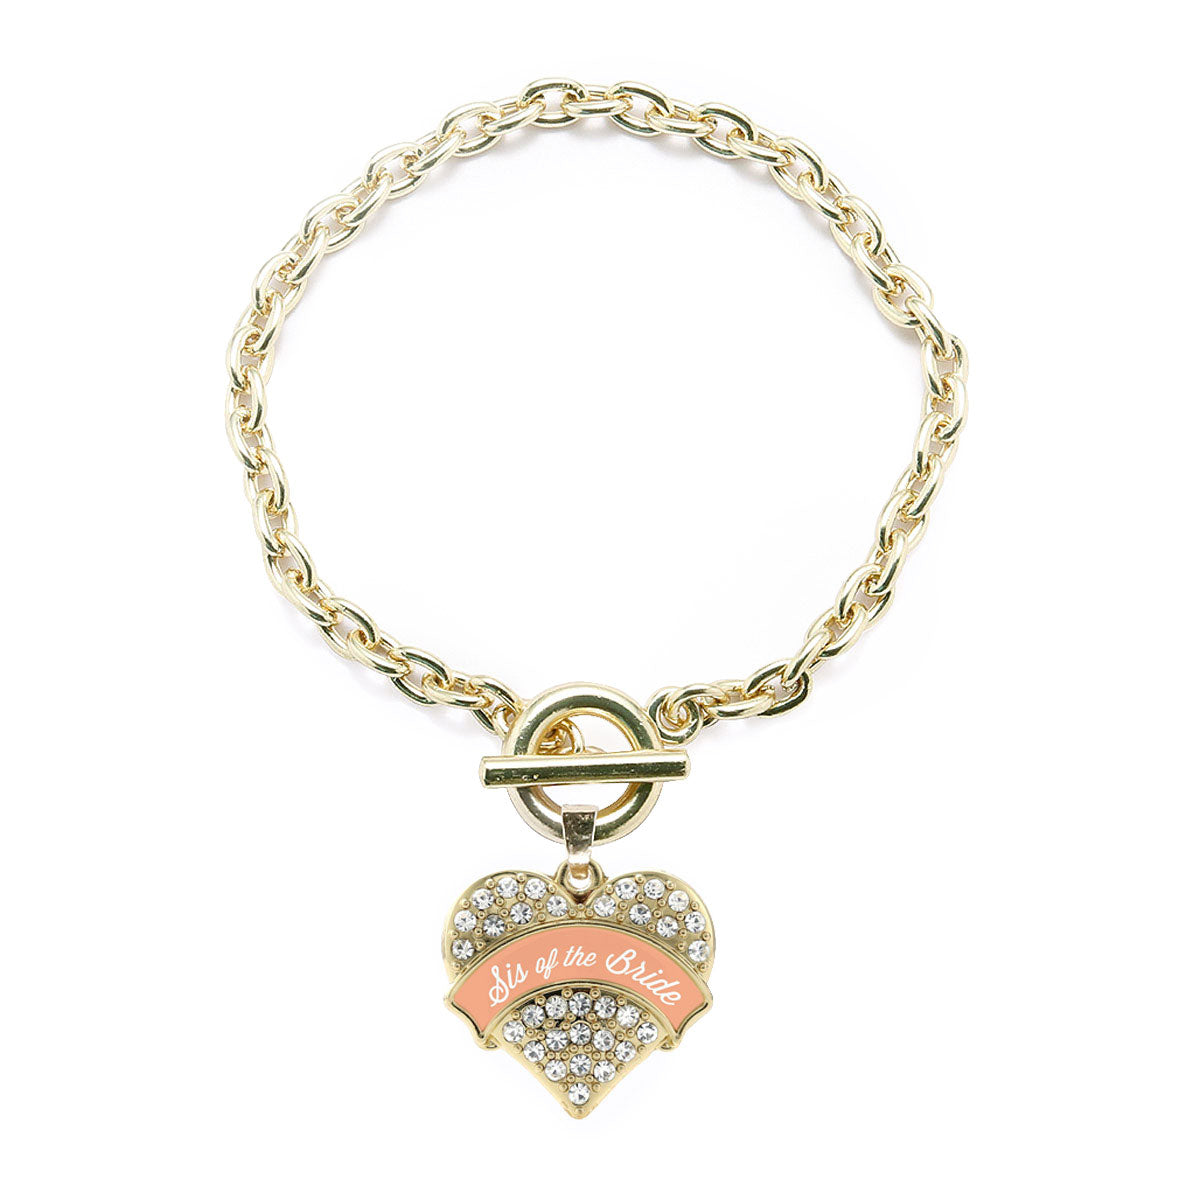 Gold Peach Sis of the Bride Pave Heart Charm Toggle Bracelet